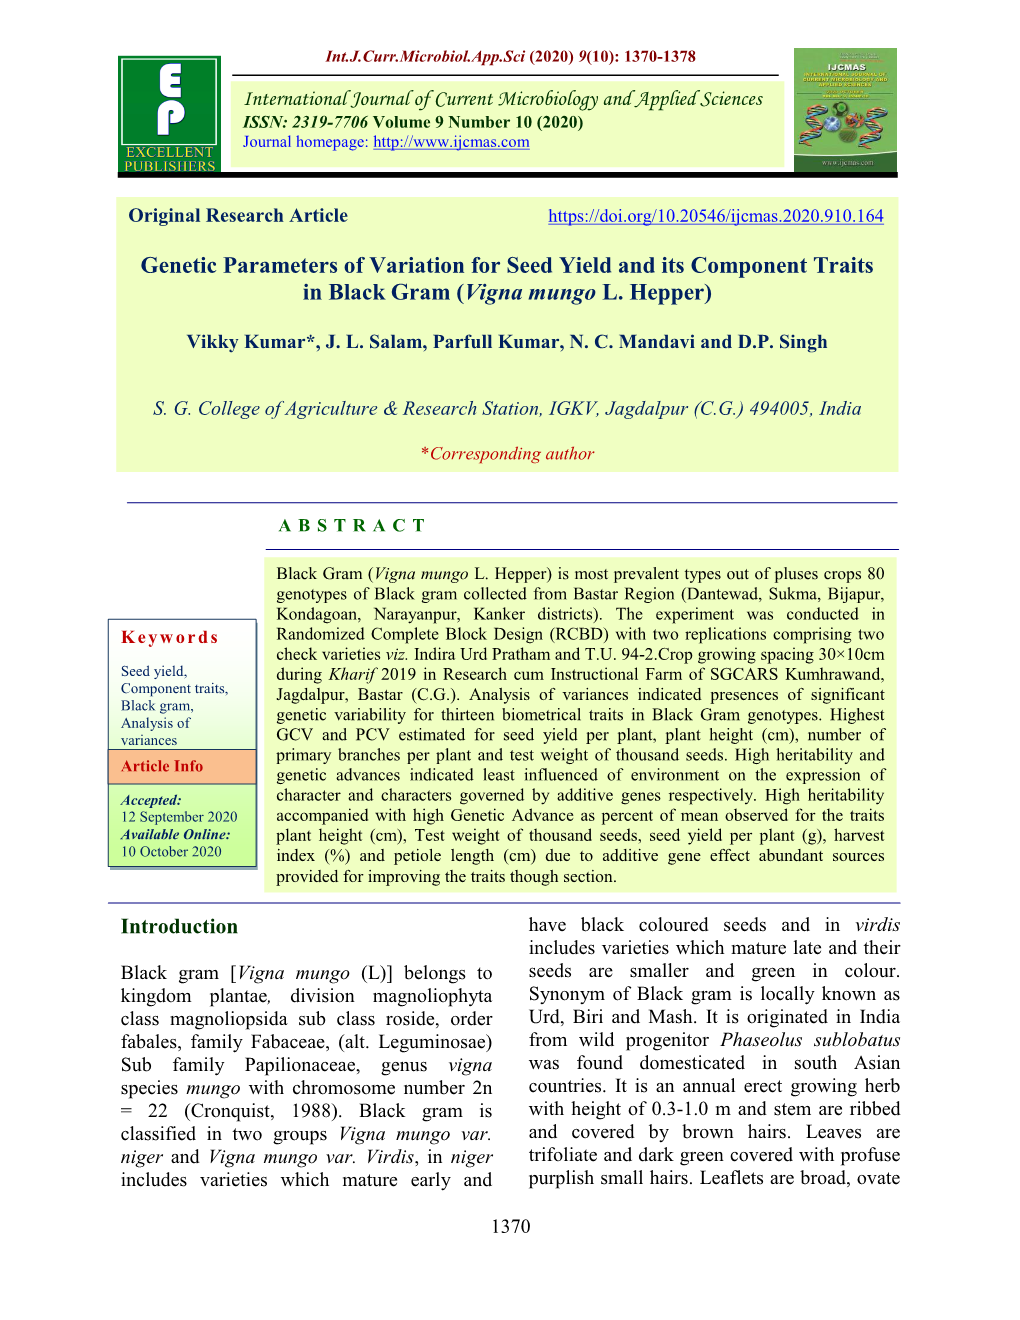 Genetic Parameters of Variation for Seed Yield and Its Component Traits in Black Gram (Vigna Mungo L